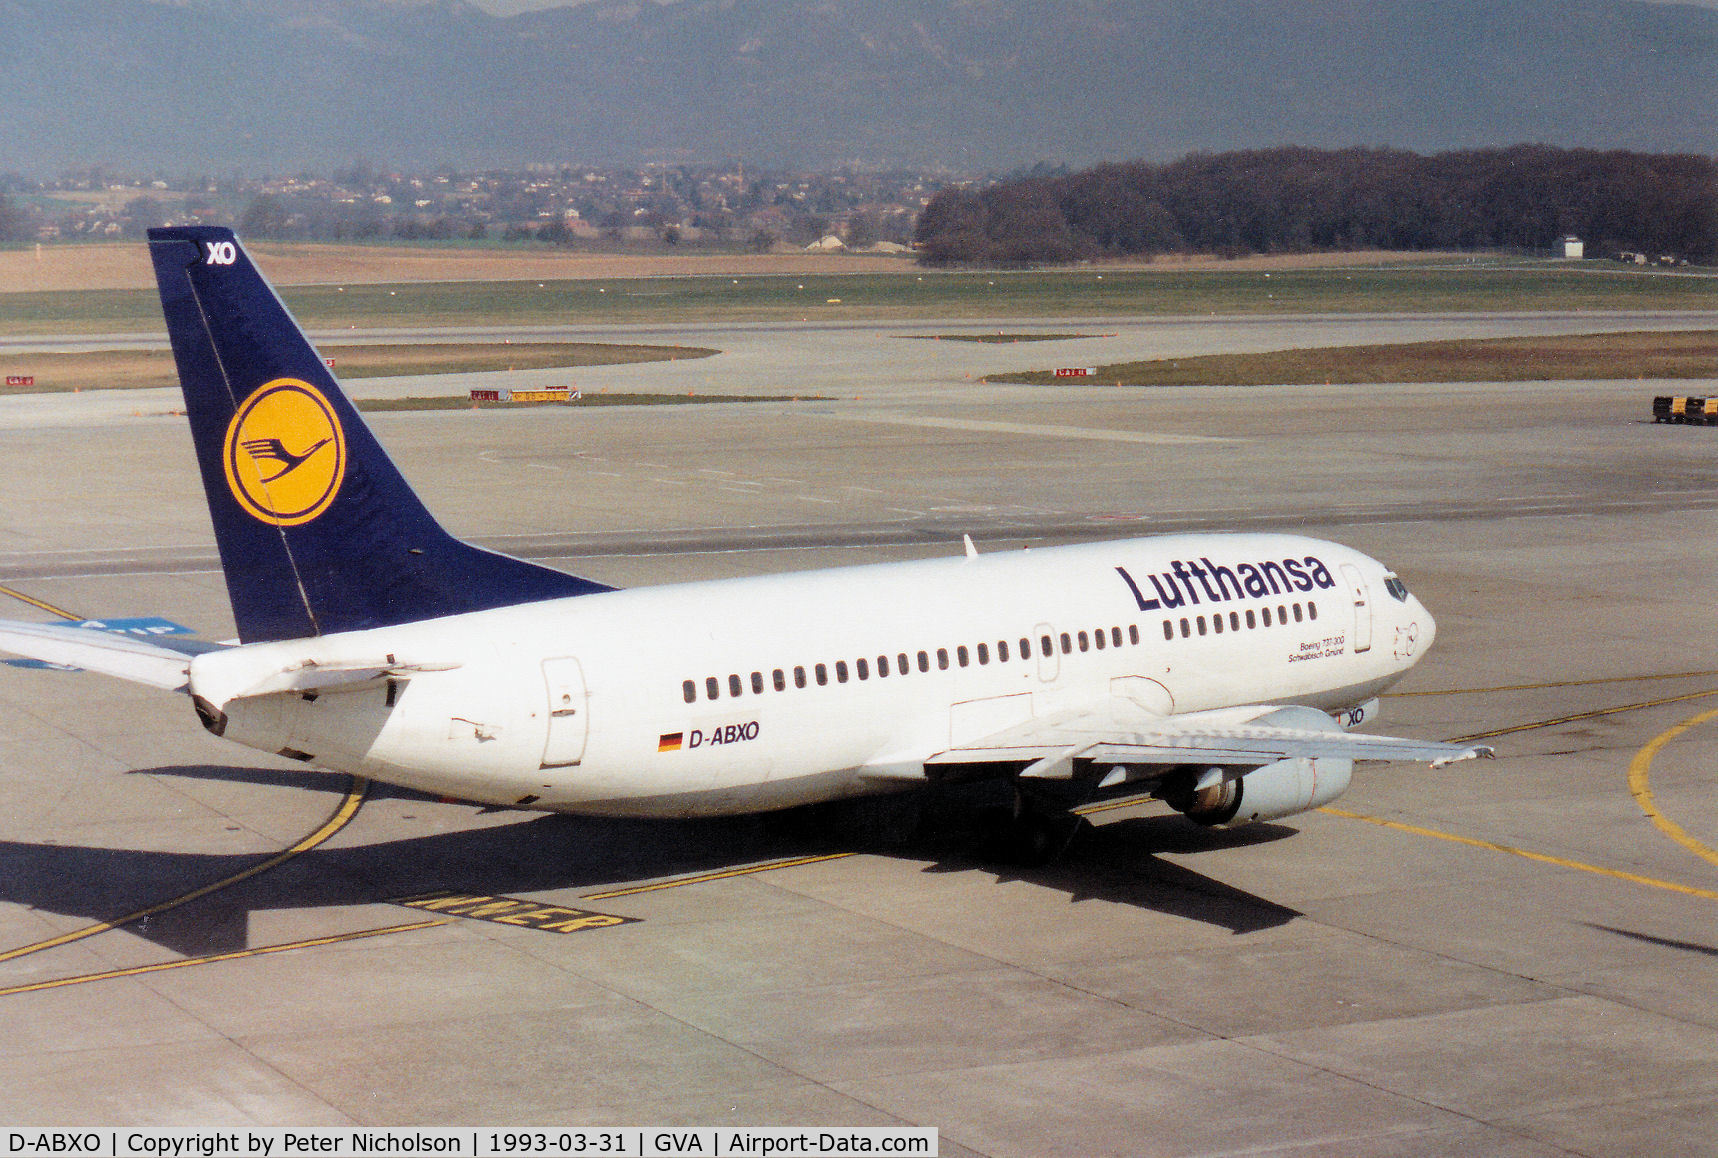 D-ABXO, 1987 Boeing 737-330 C/N 23873, Boeing 737-330 of Lufthansa taxying to the active runway at Geneva in March 1993.